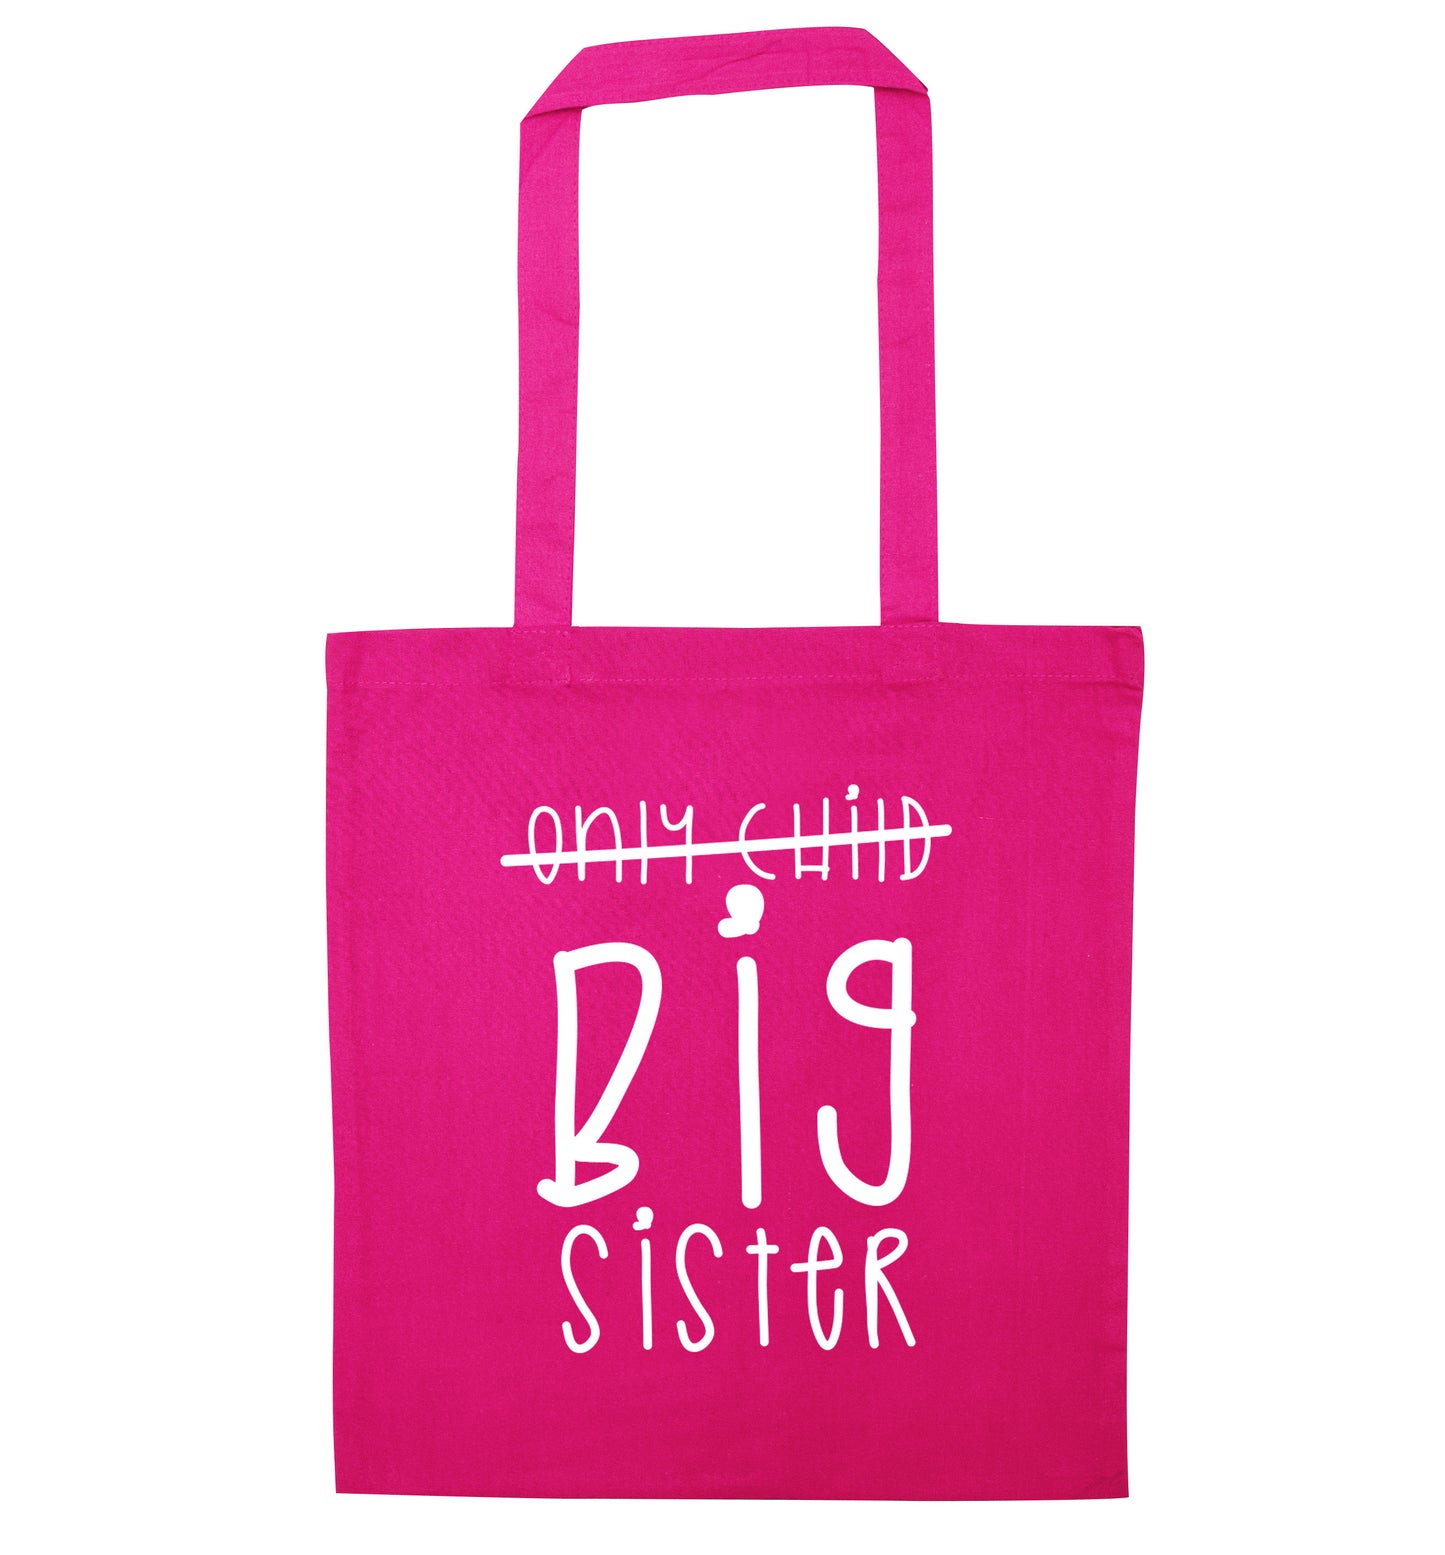 Only child big sister pink tote bag